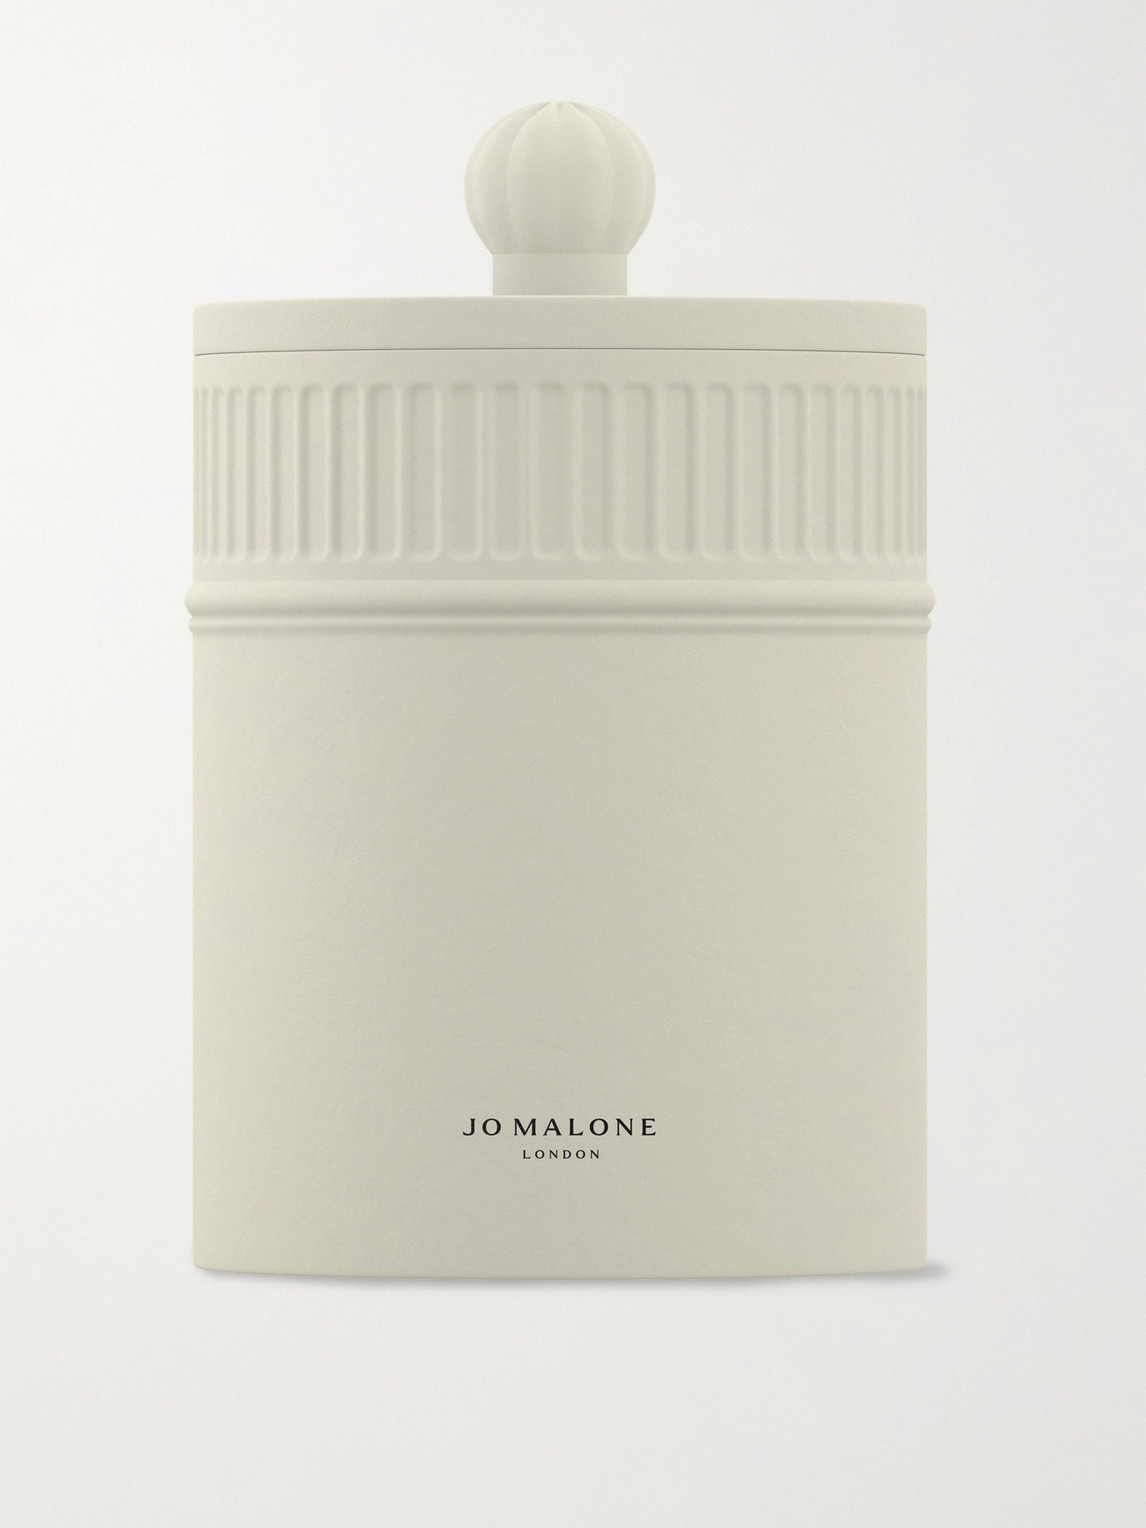 JO MALONE LONDON FRESH FIG & CASSIS SCENTED CANDLE, 300G